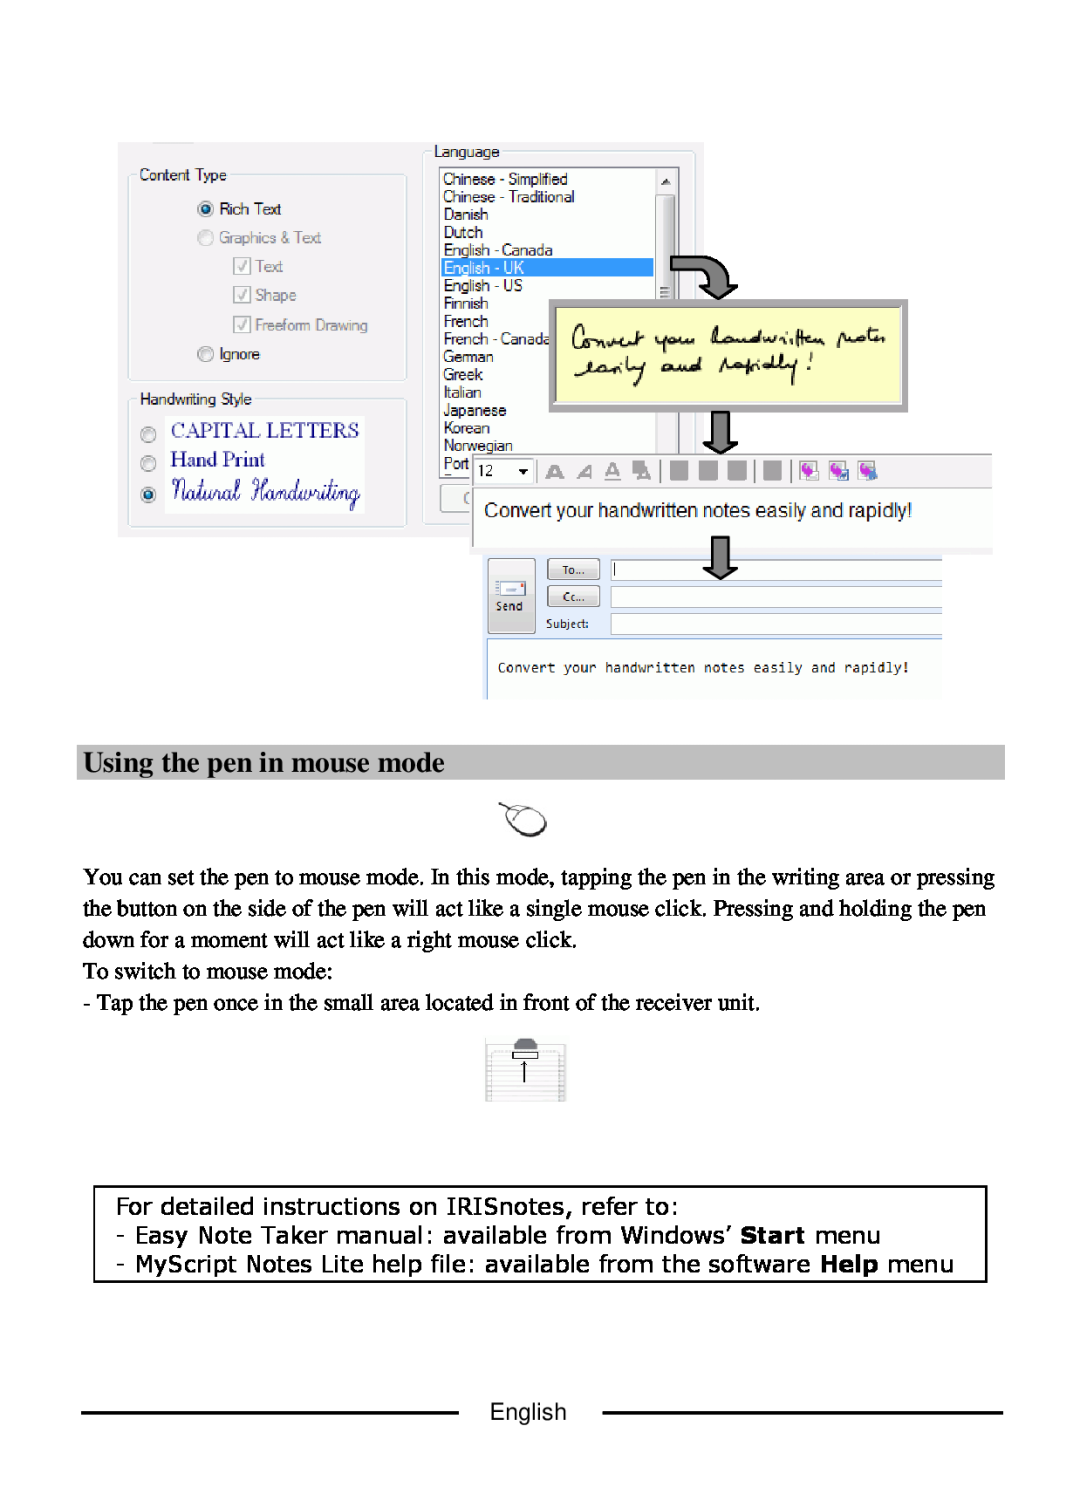 I.R.I.S IRISnotes manual Using the pen in mouse mode 